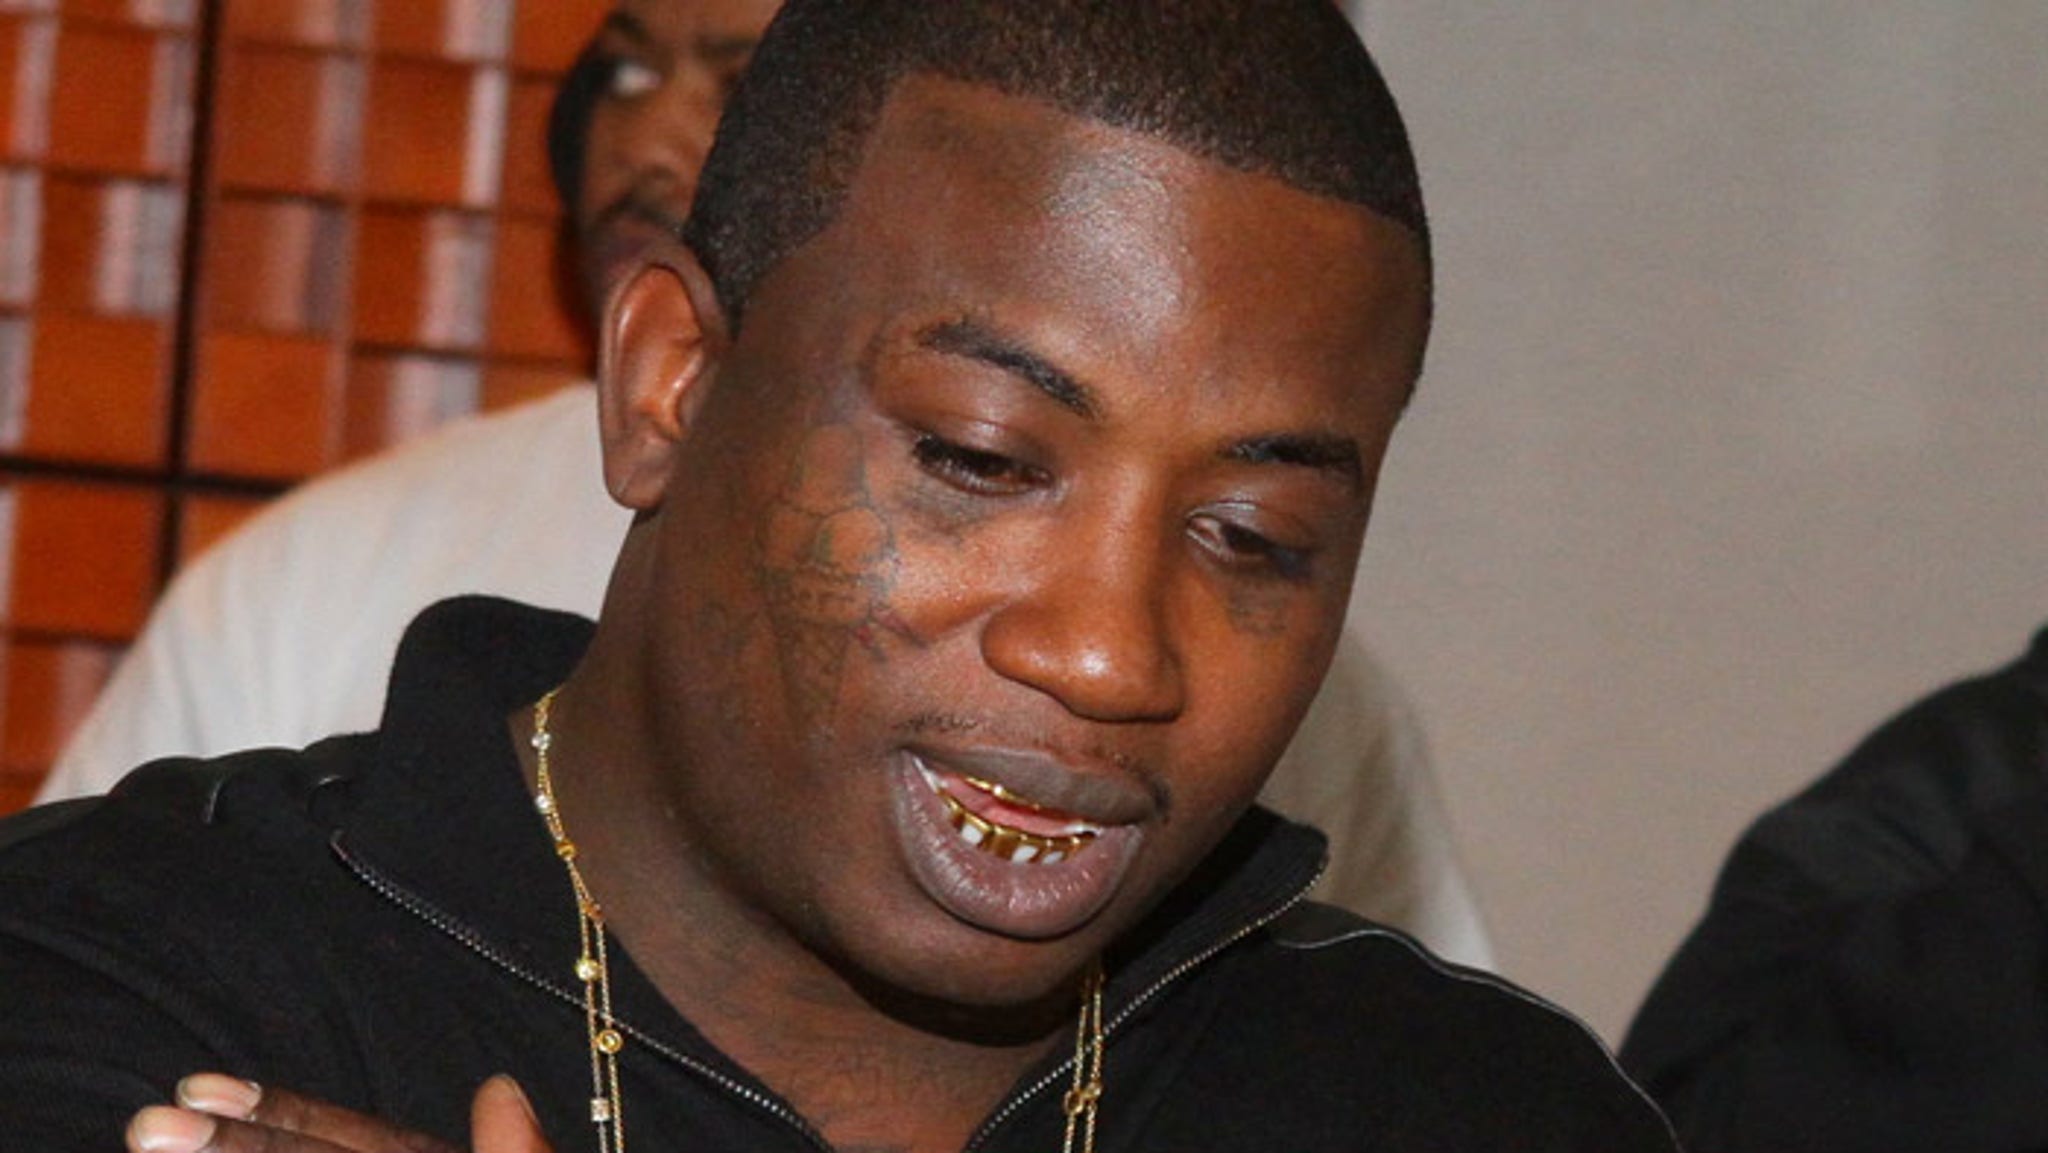 Gucci Mane -- Random Prisoner Tries to Free Rapper ... By Playing Lawyer